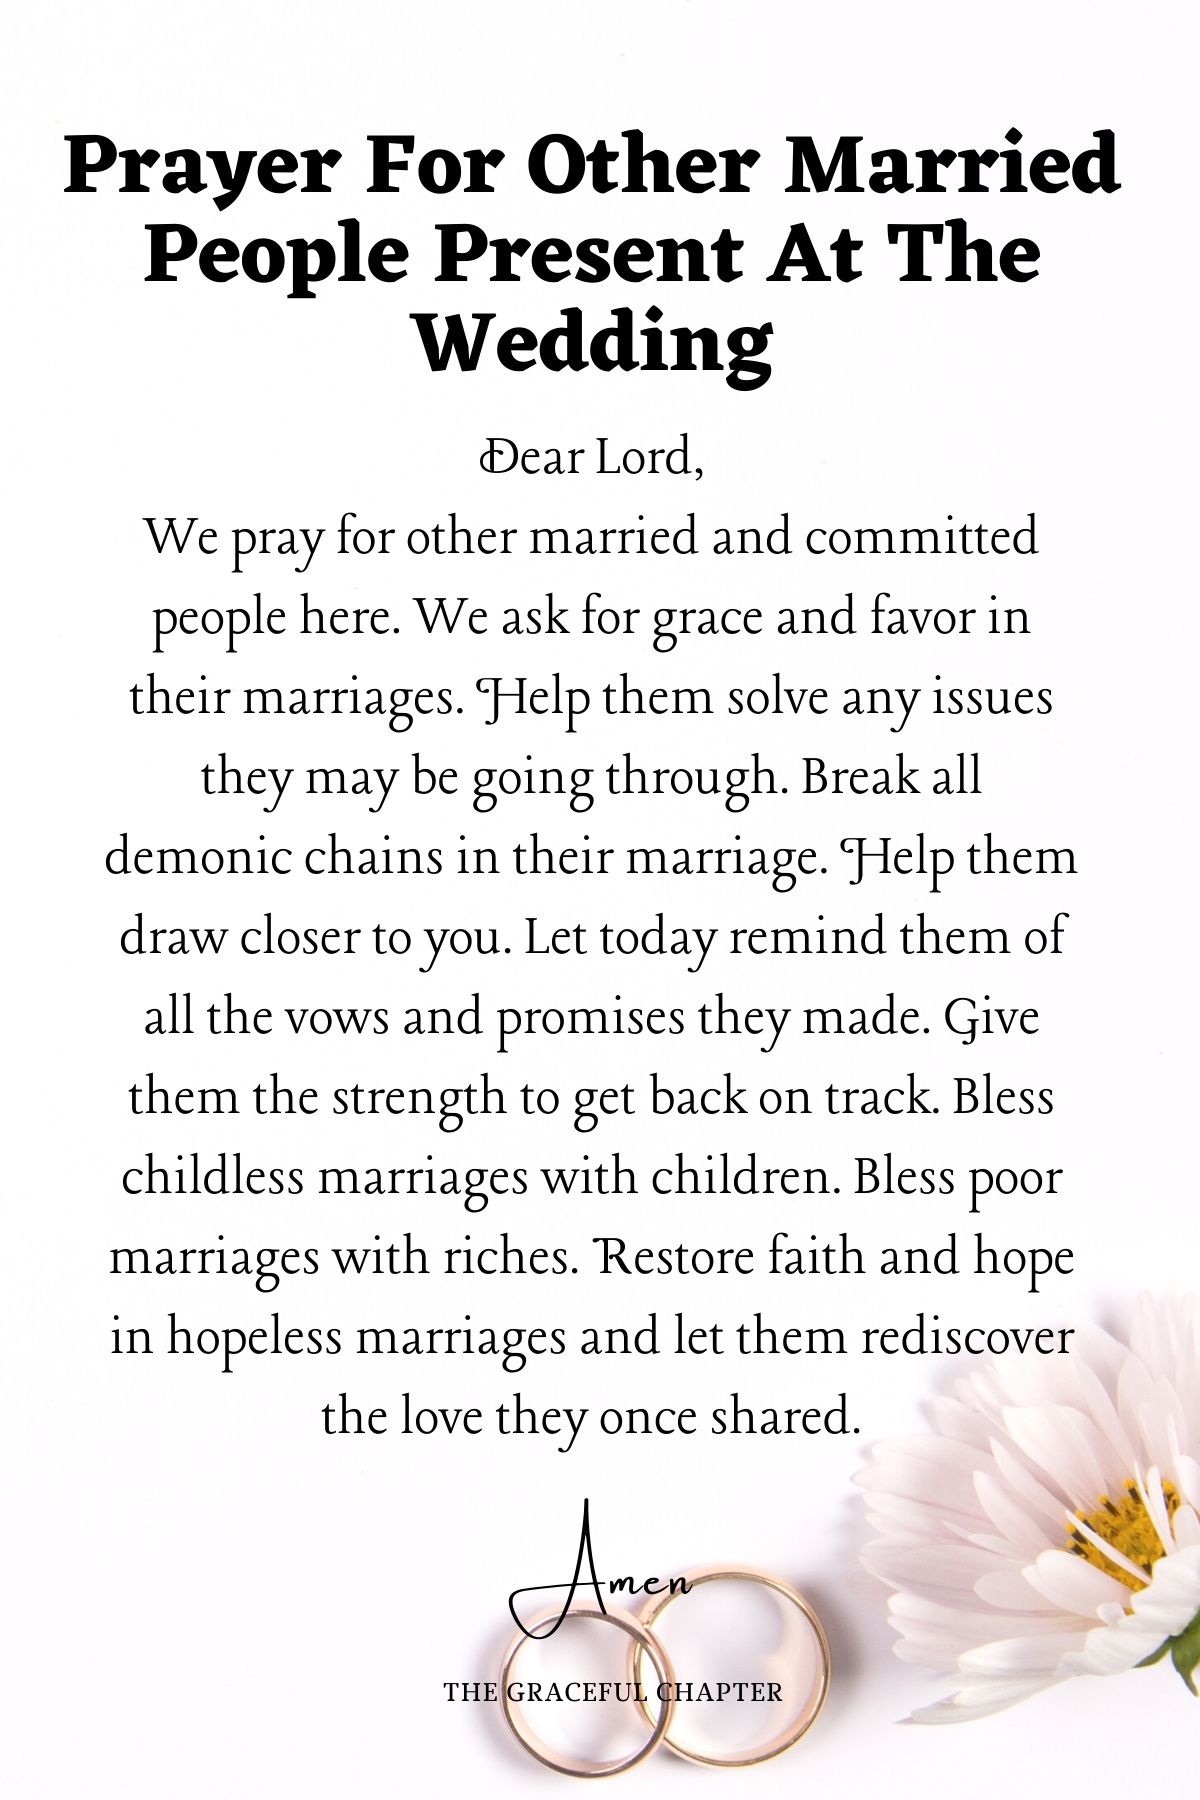 Prayer for other married people present at the wedding